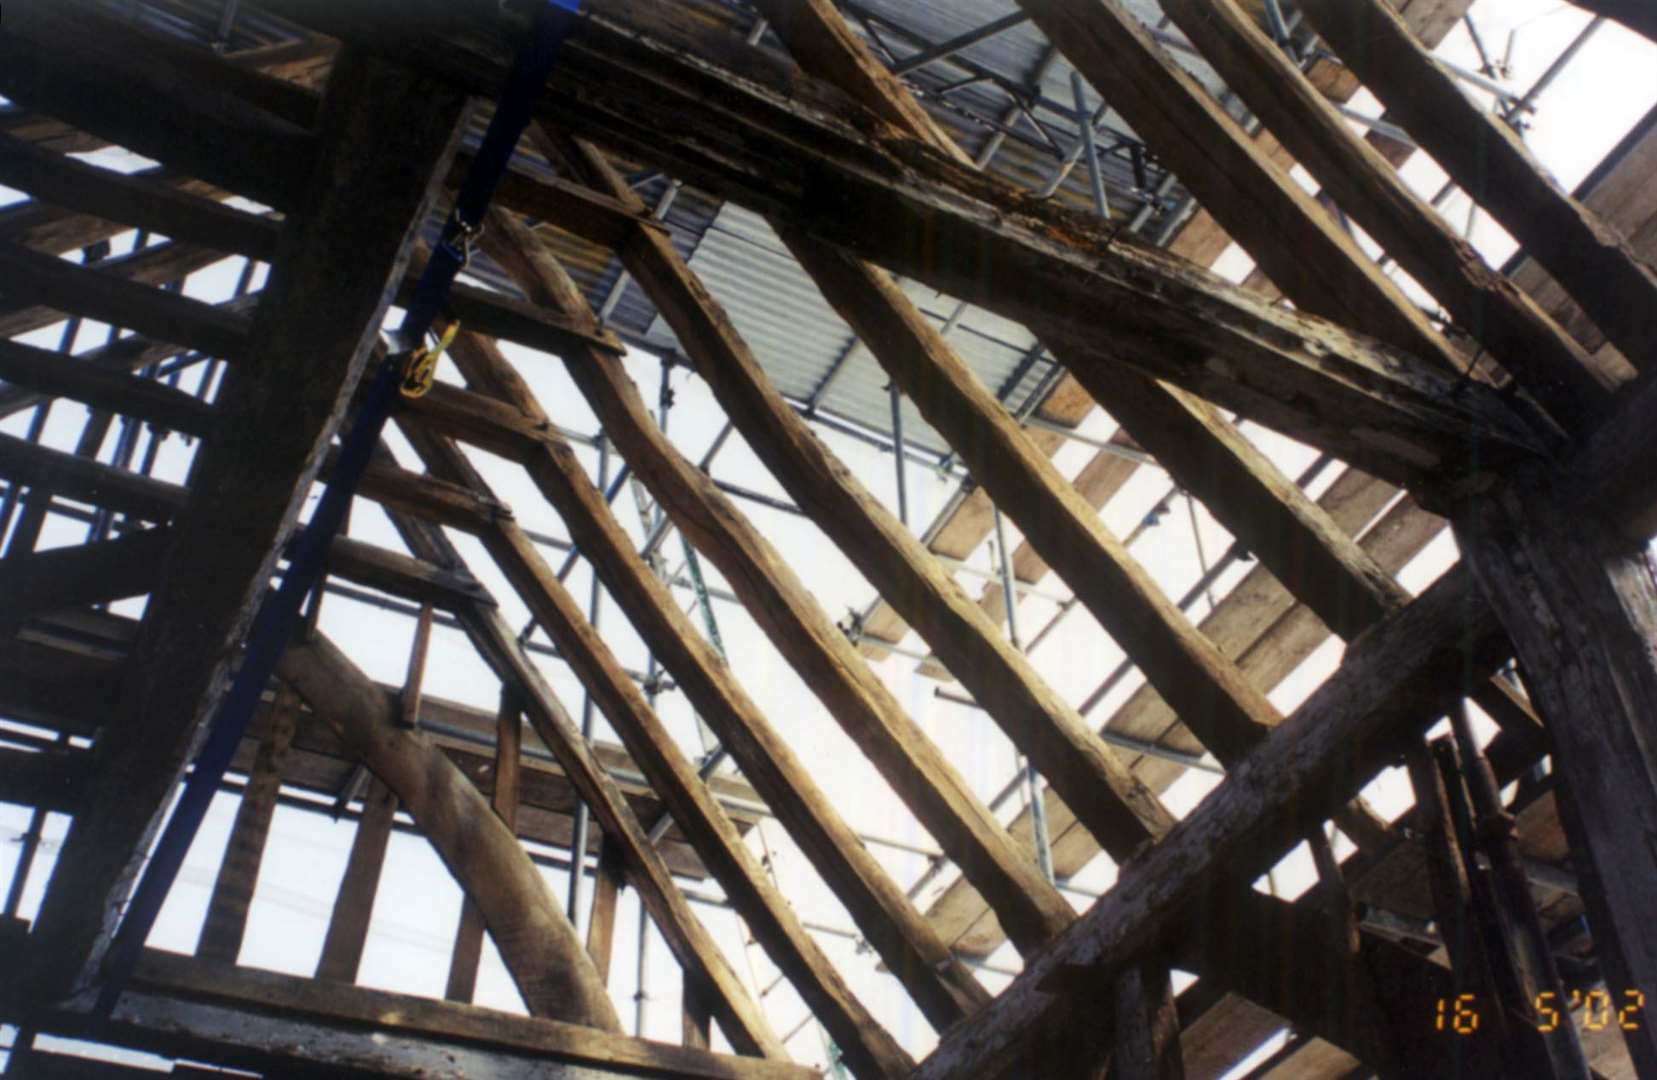 The roof beams while during restoration